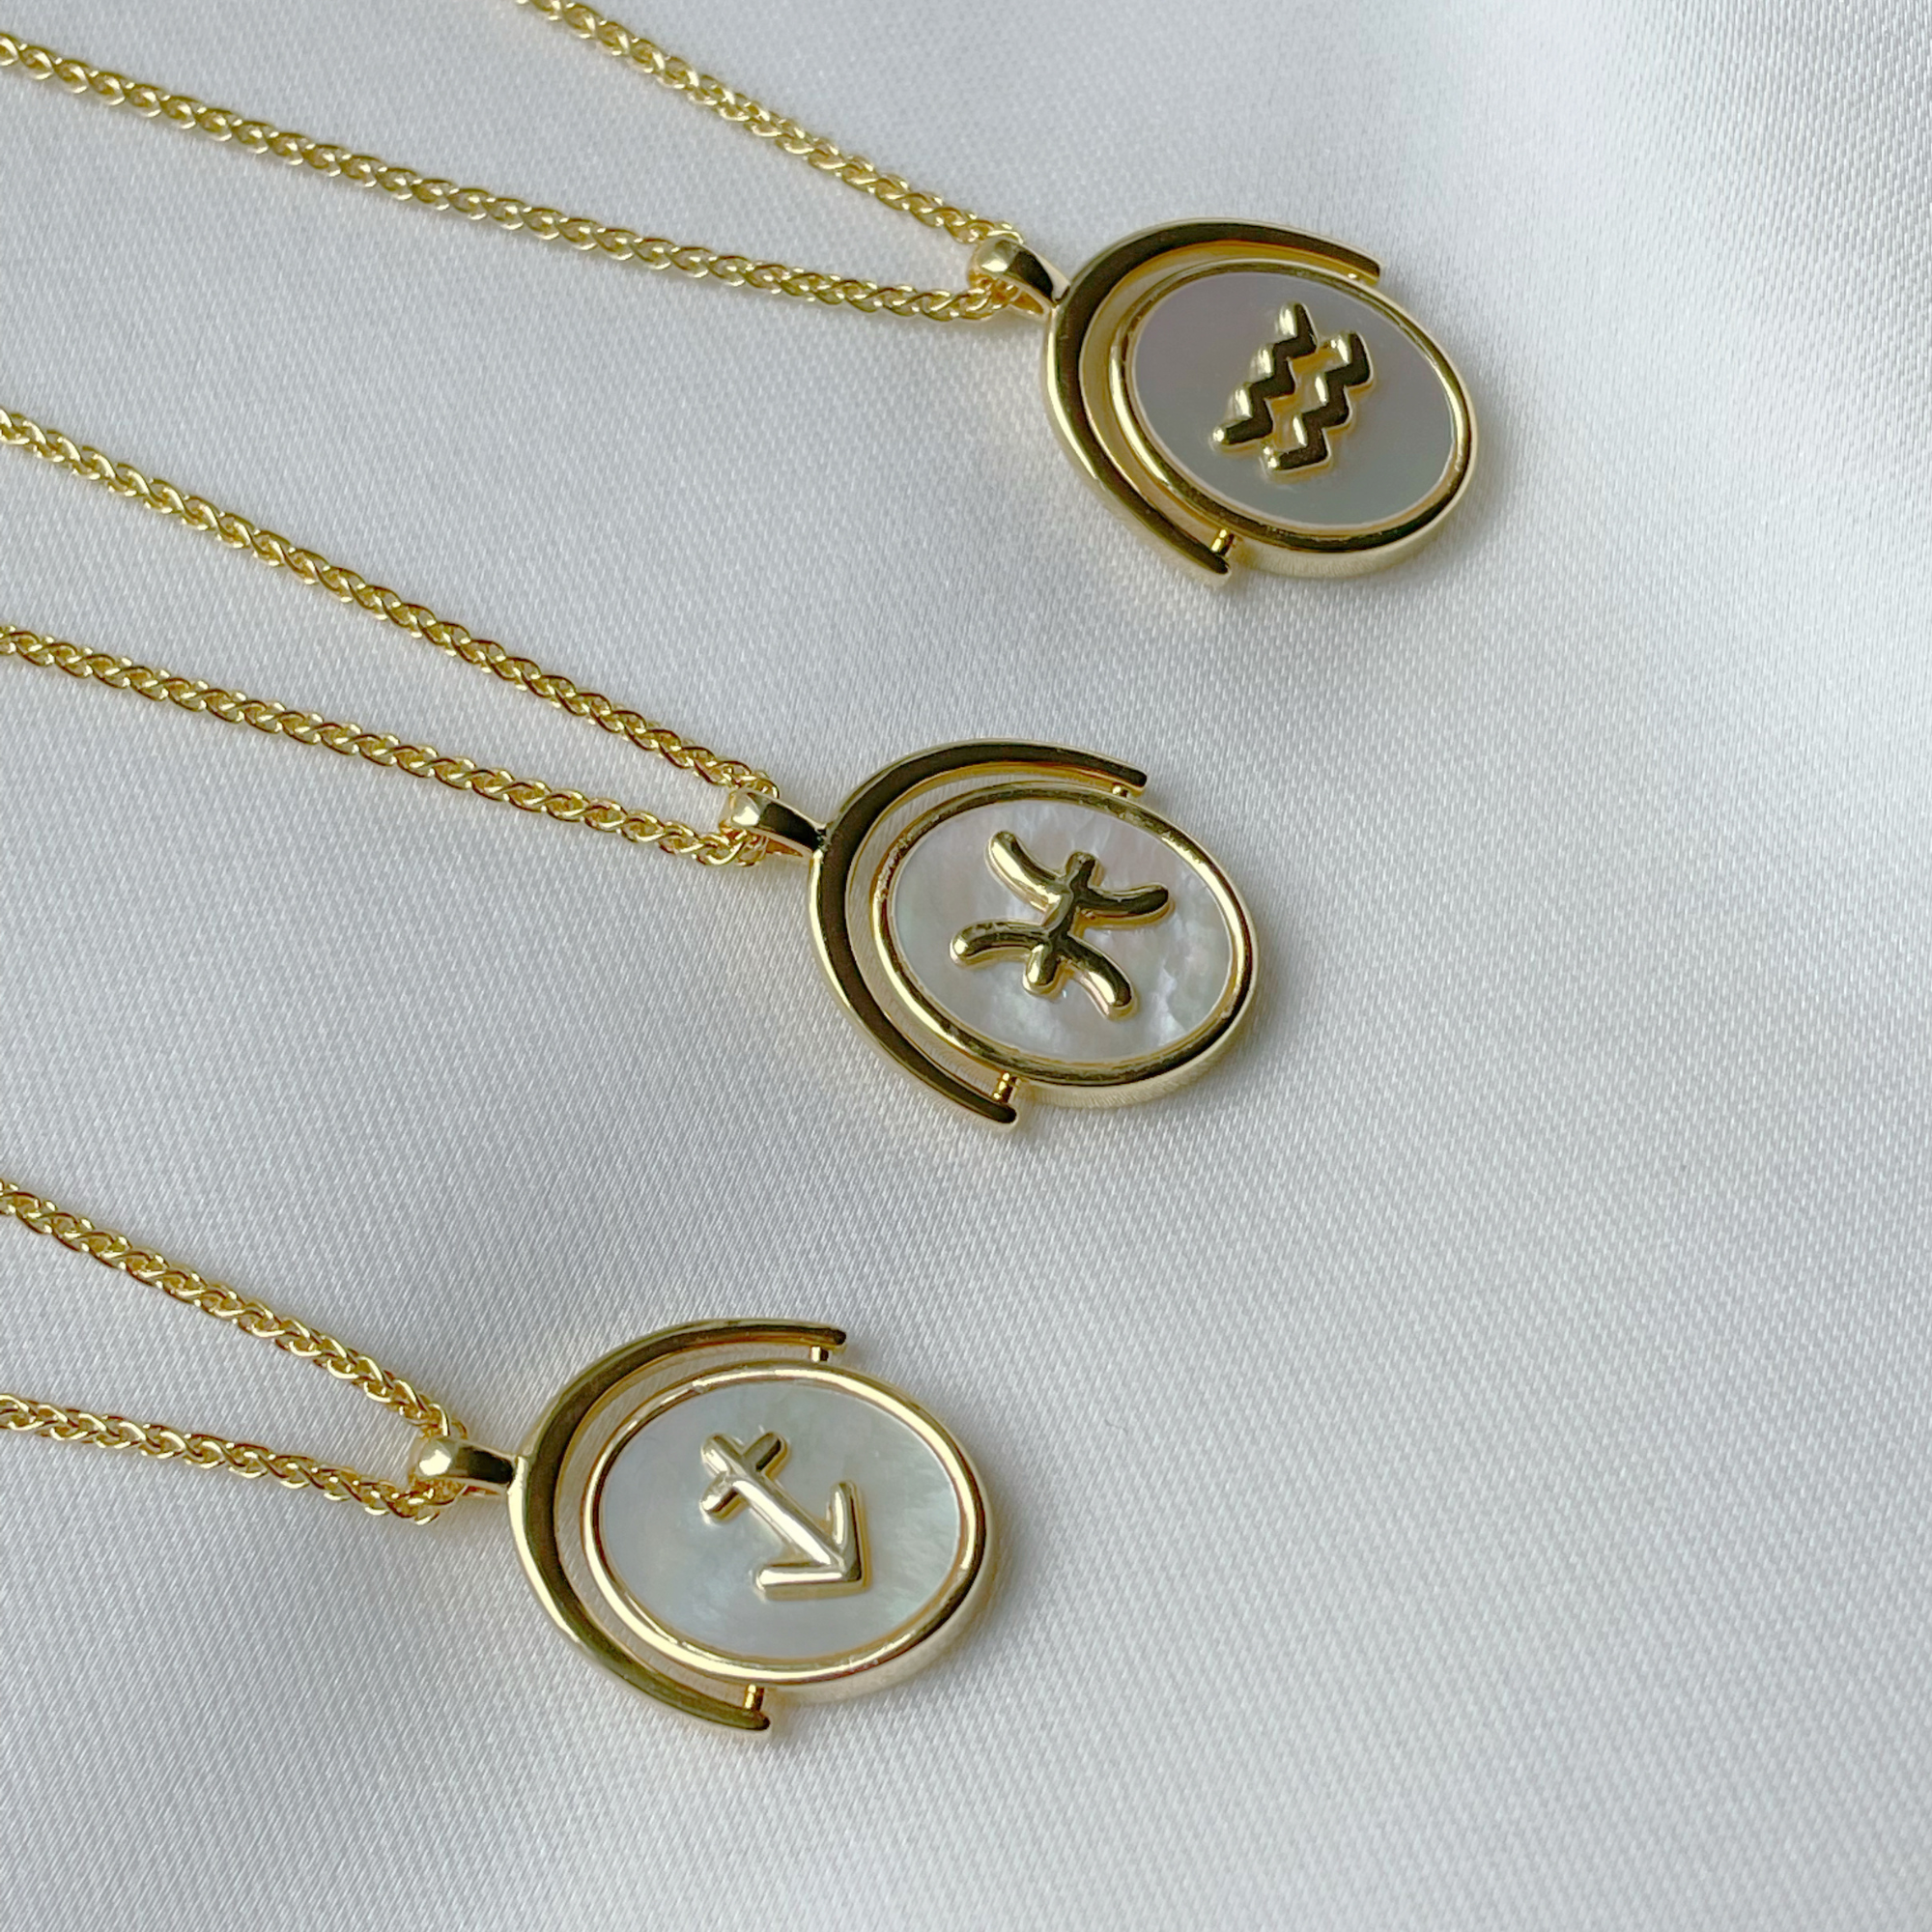 THE ZODIAC SPINNER NECKLACE